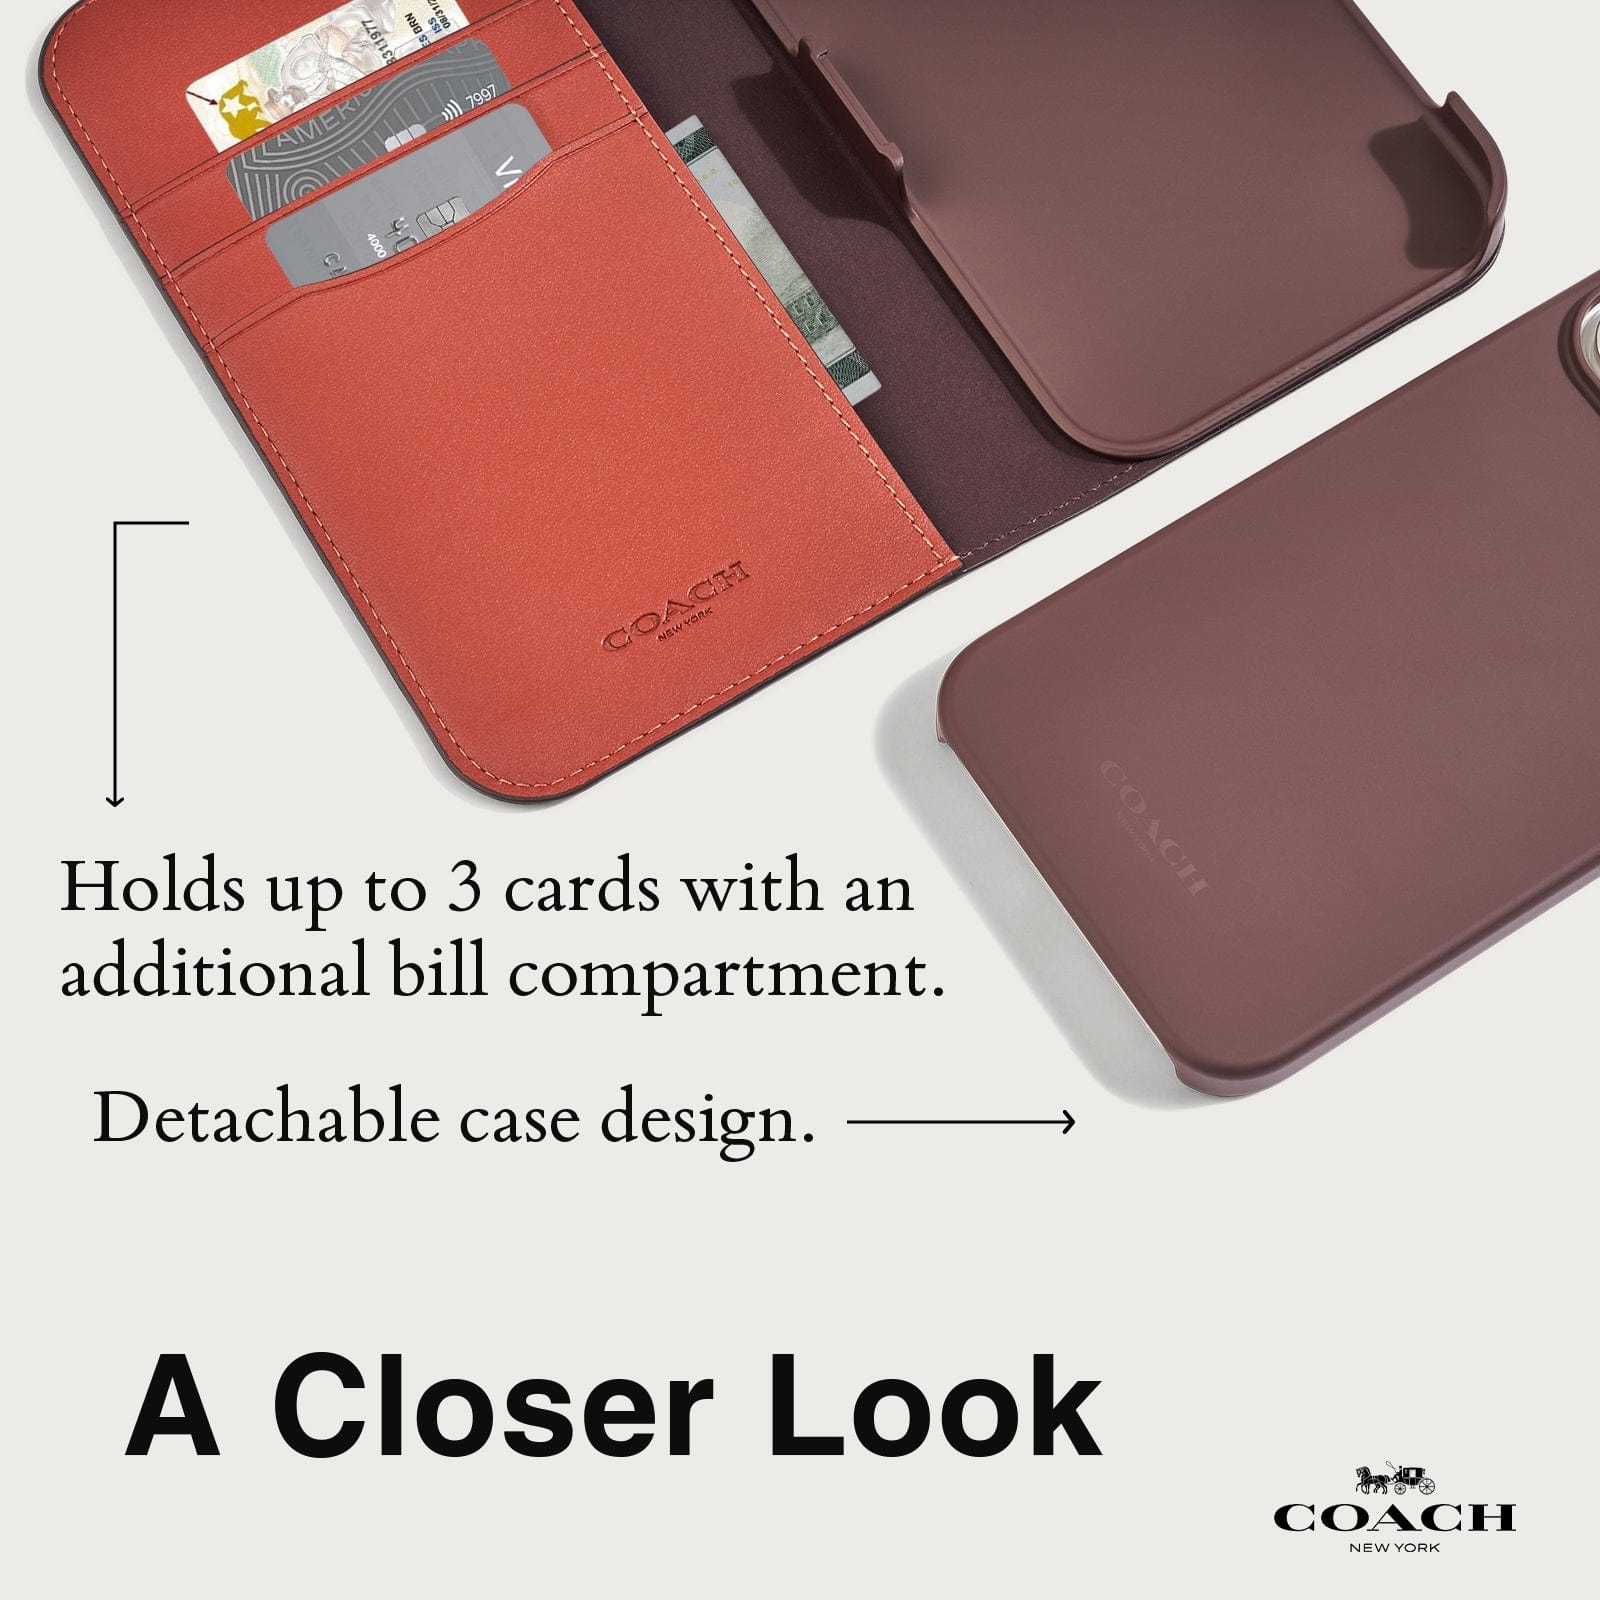 HOLDS UP TO 3 CARDS WITH AN ADDITIONAL BILL COMPARTMENT. DETACHABLE CASE DESIGN. 